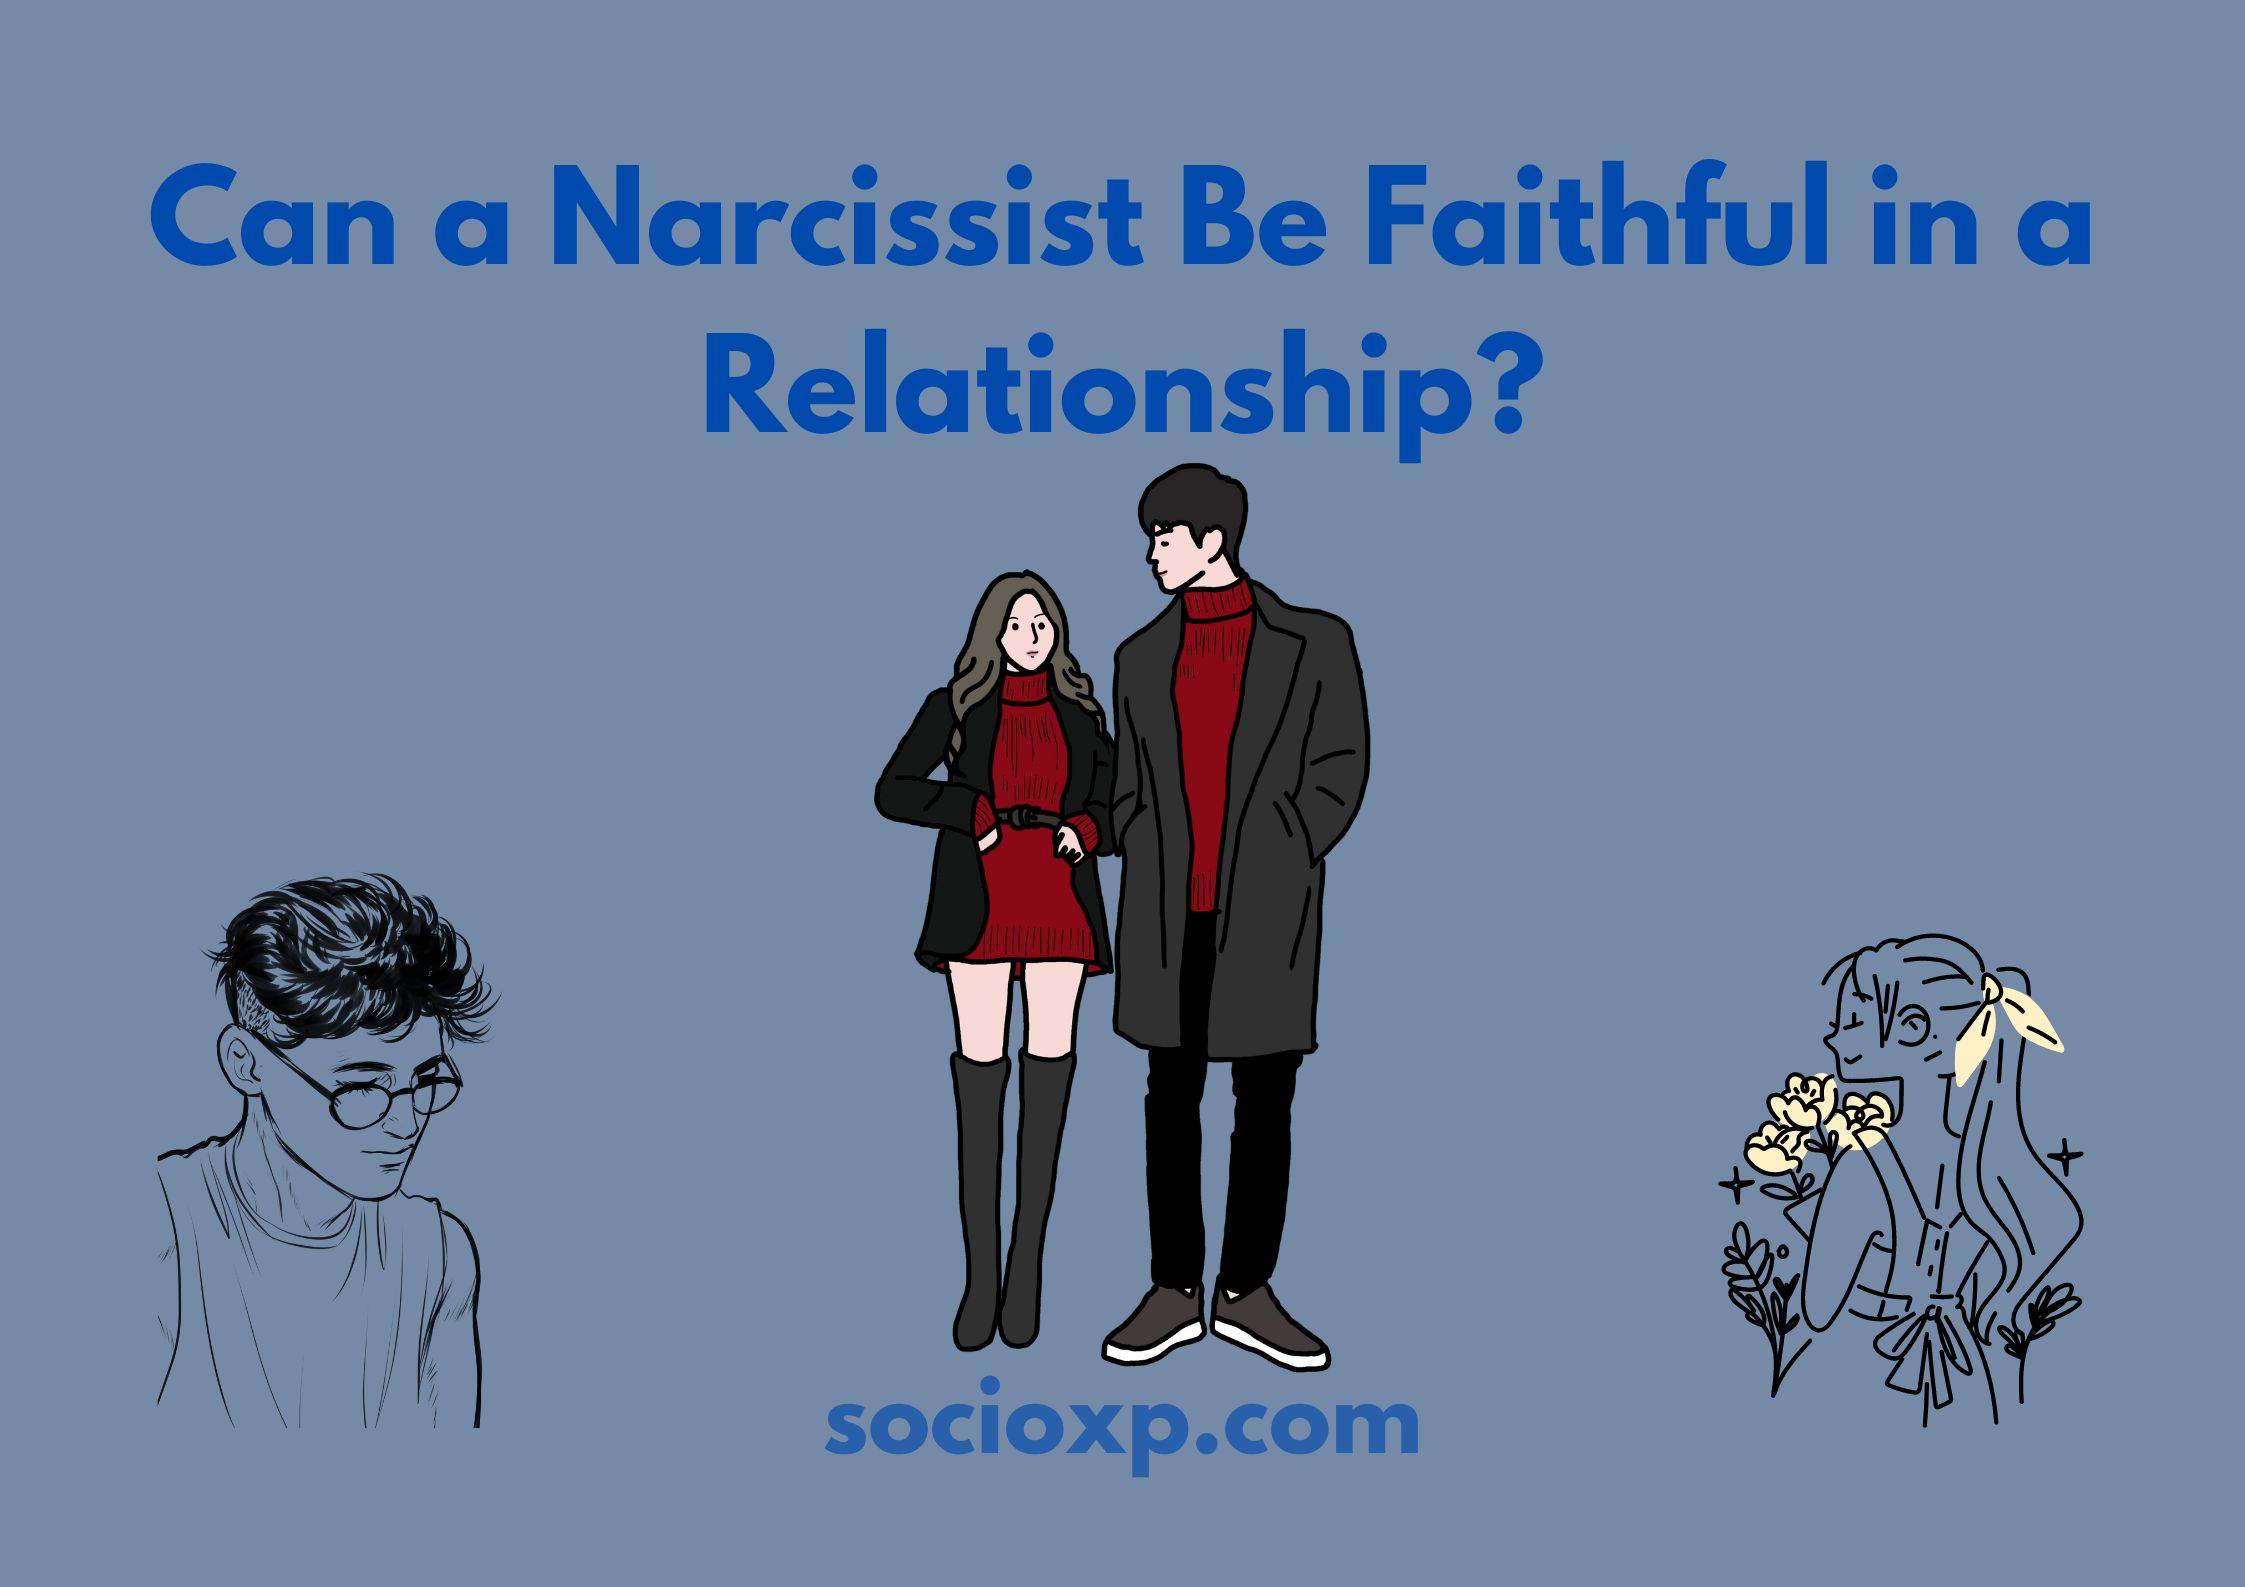 Can a Narcissist Be Faithful in a Relationship? (Yes or No With Reasons)